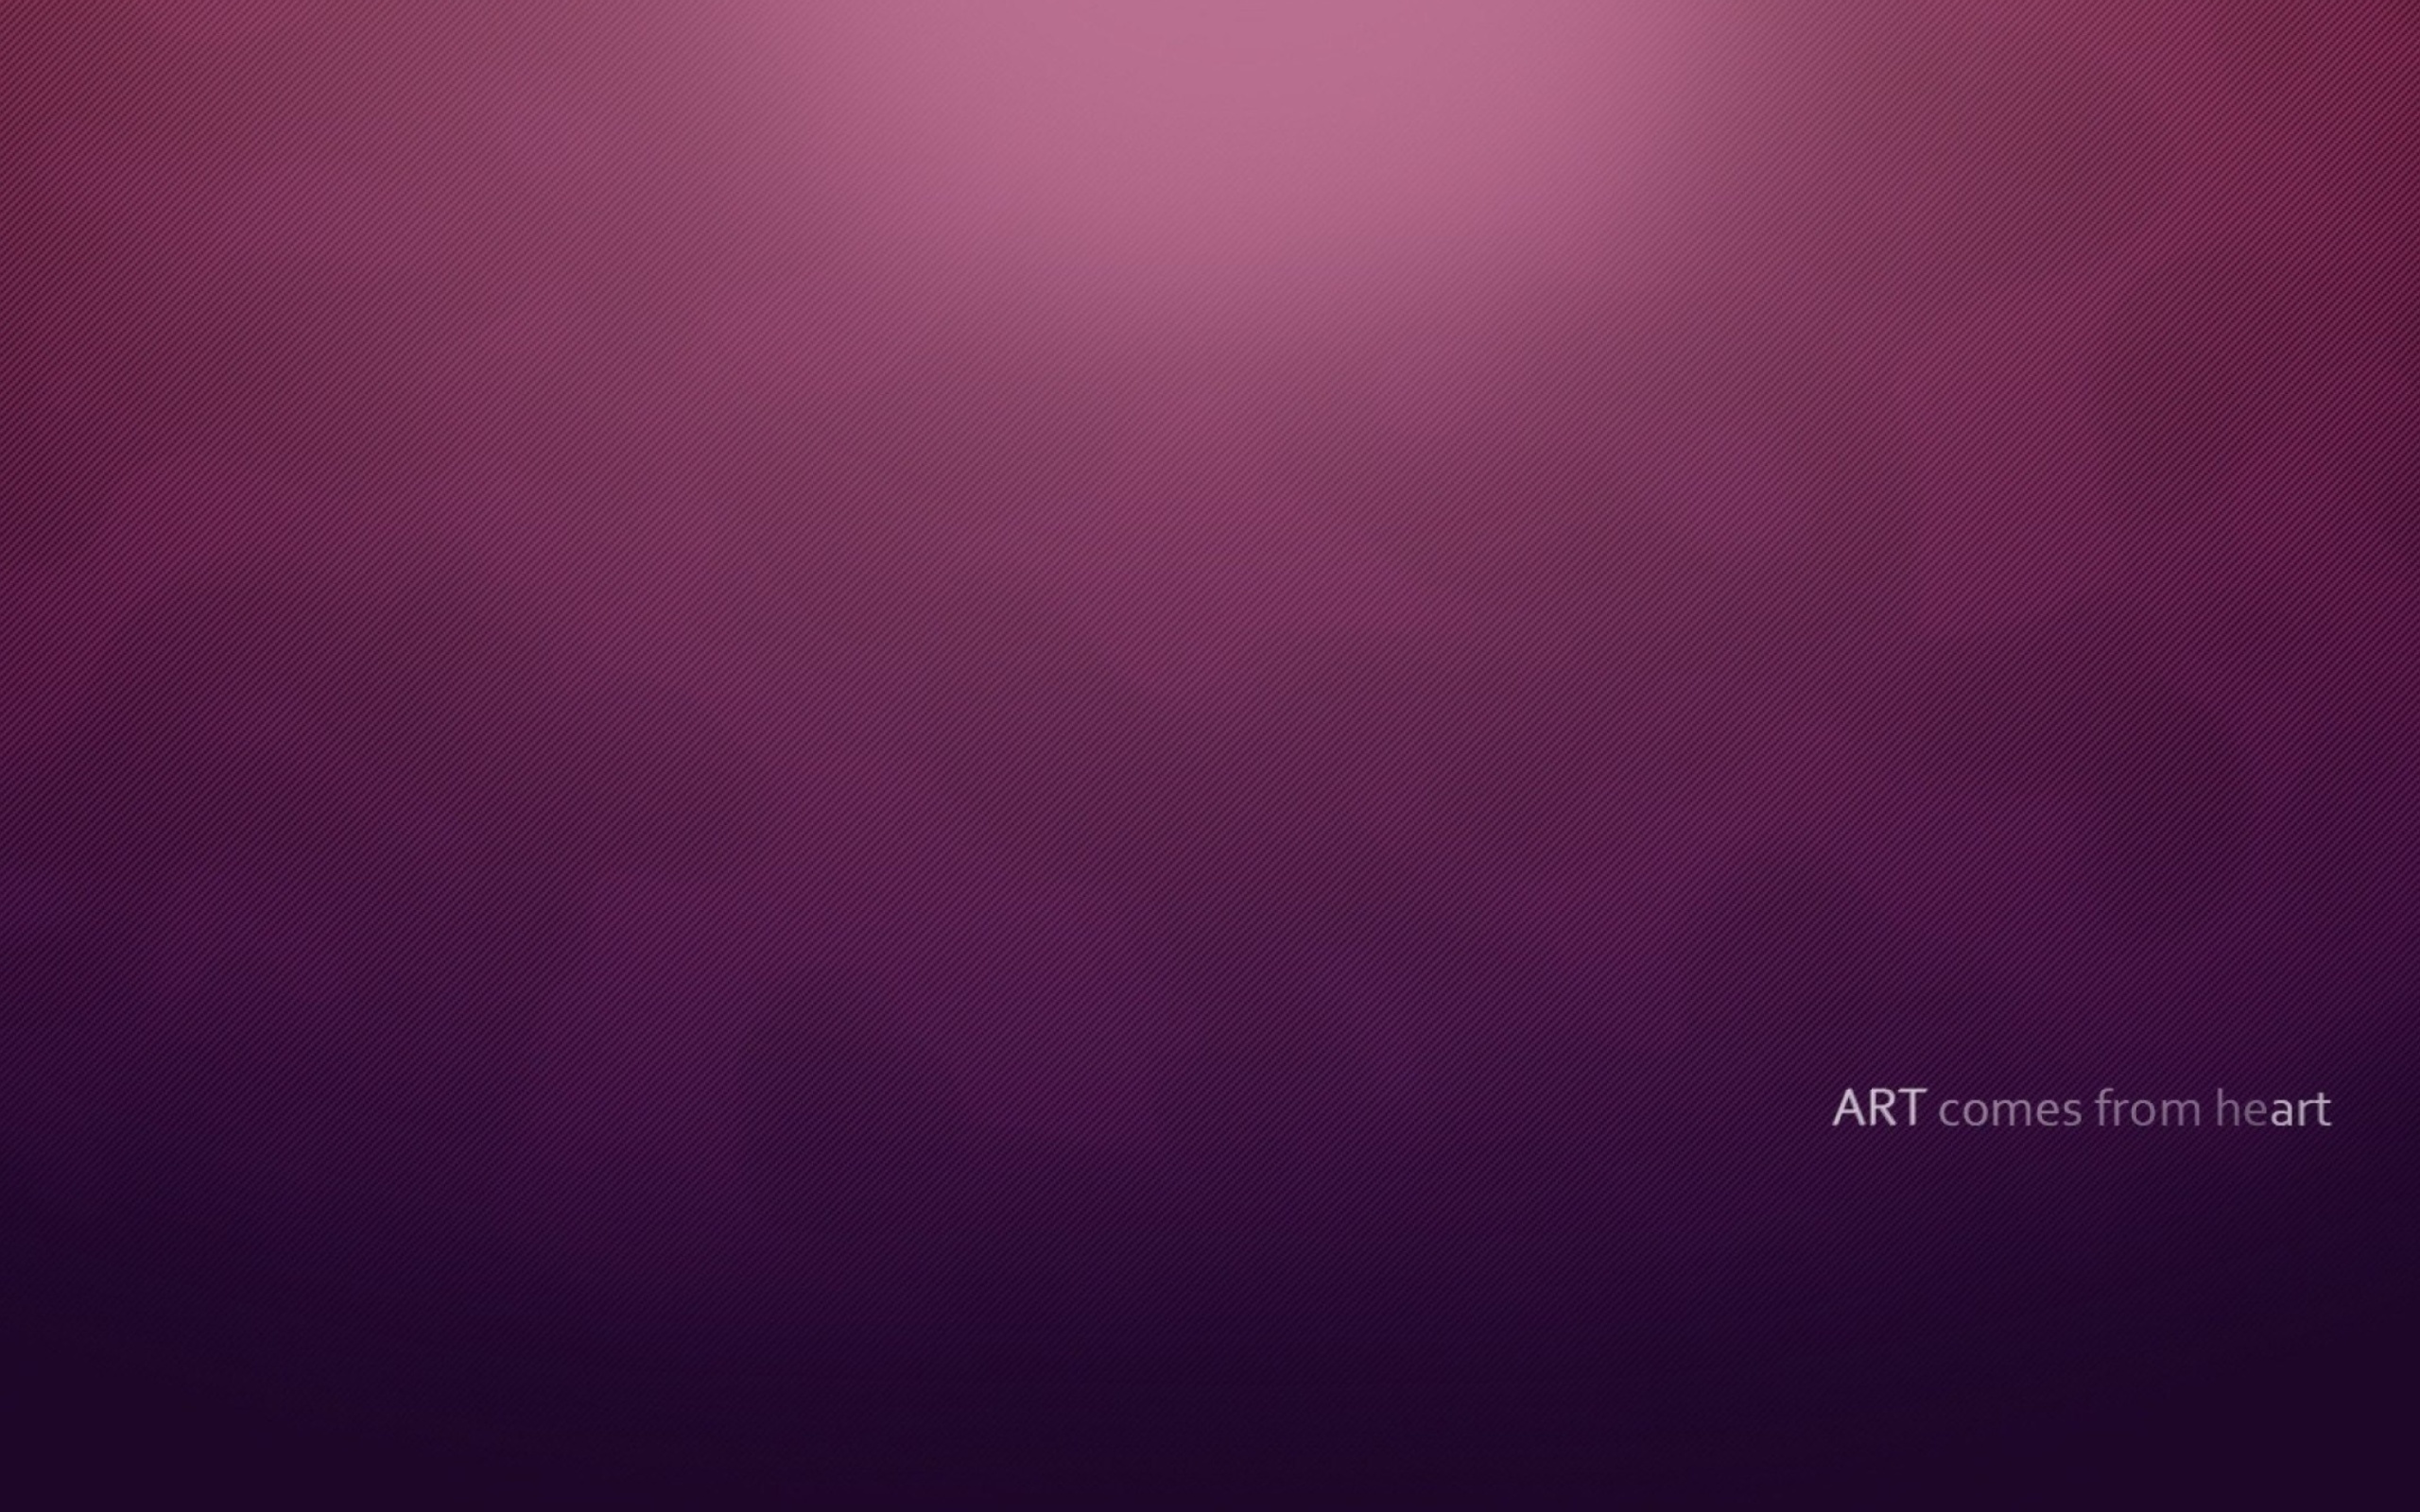 Simple Texture, Art comes from Heart wallpaper 2560x1600